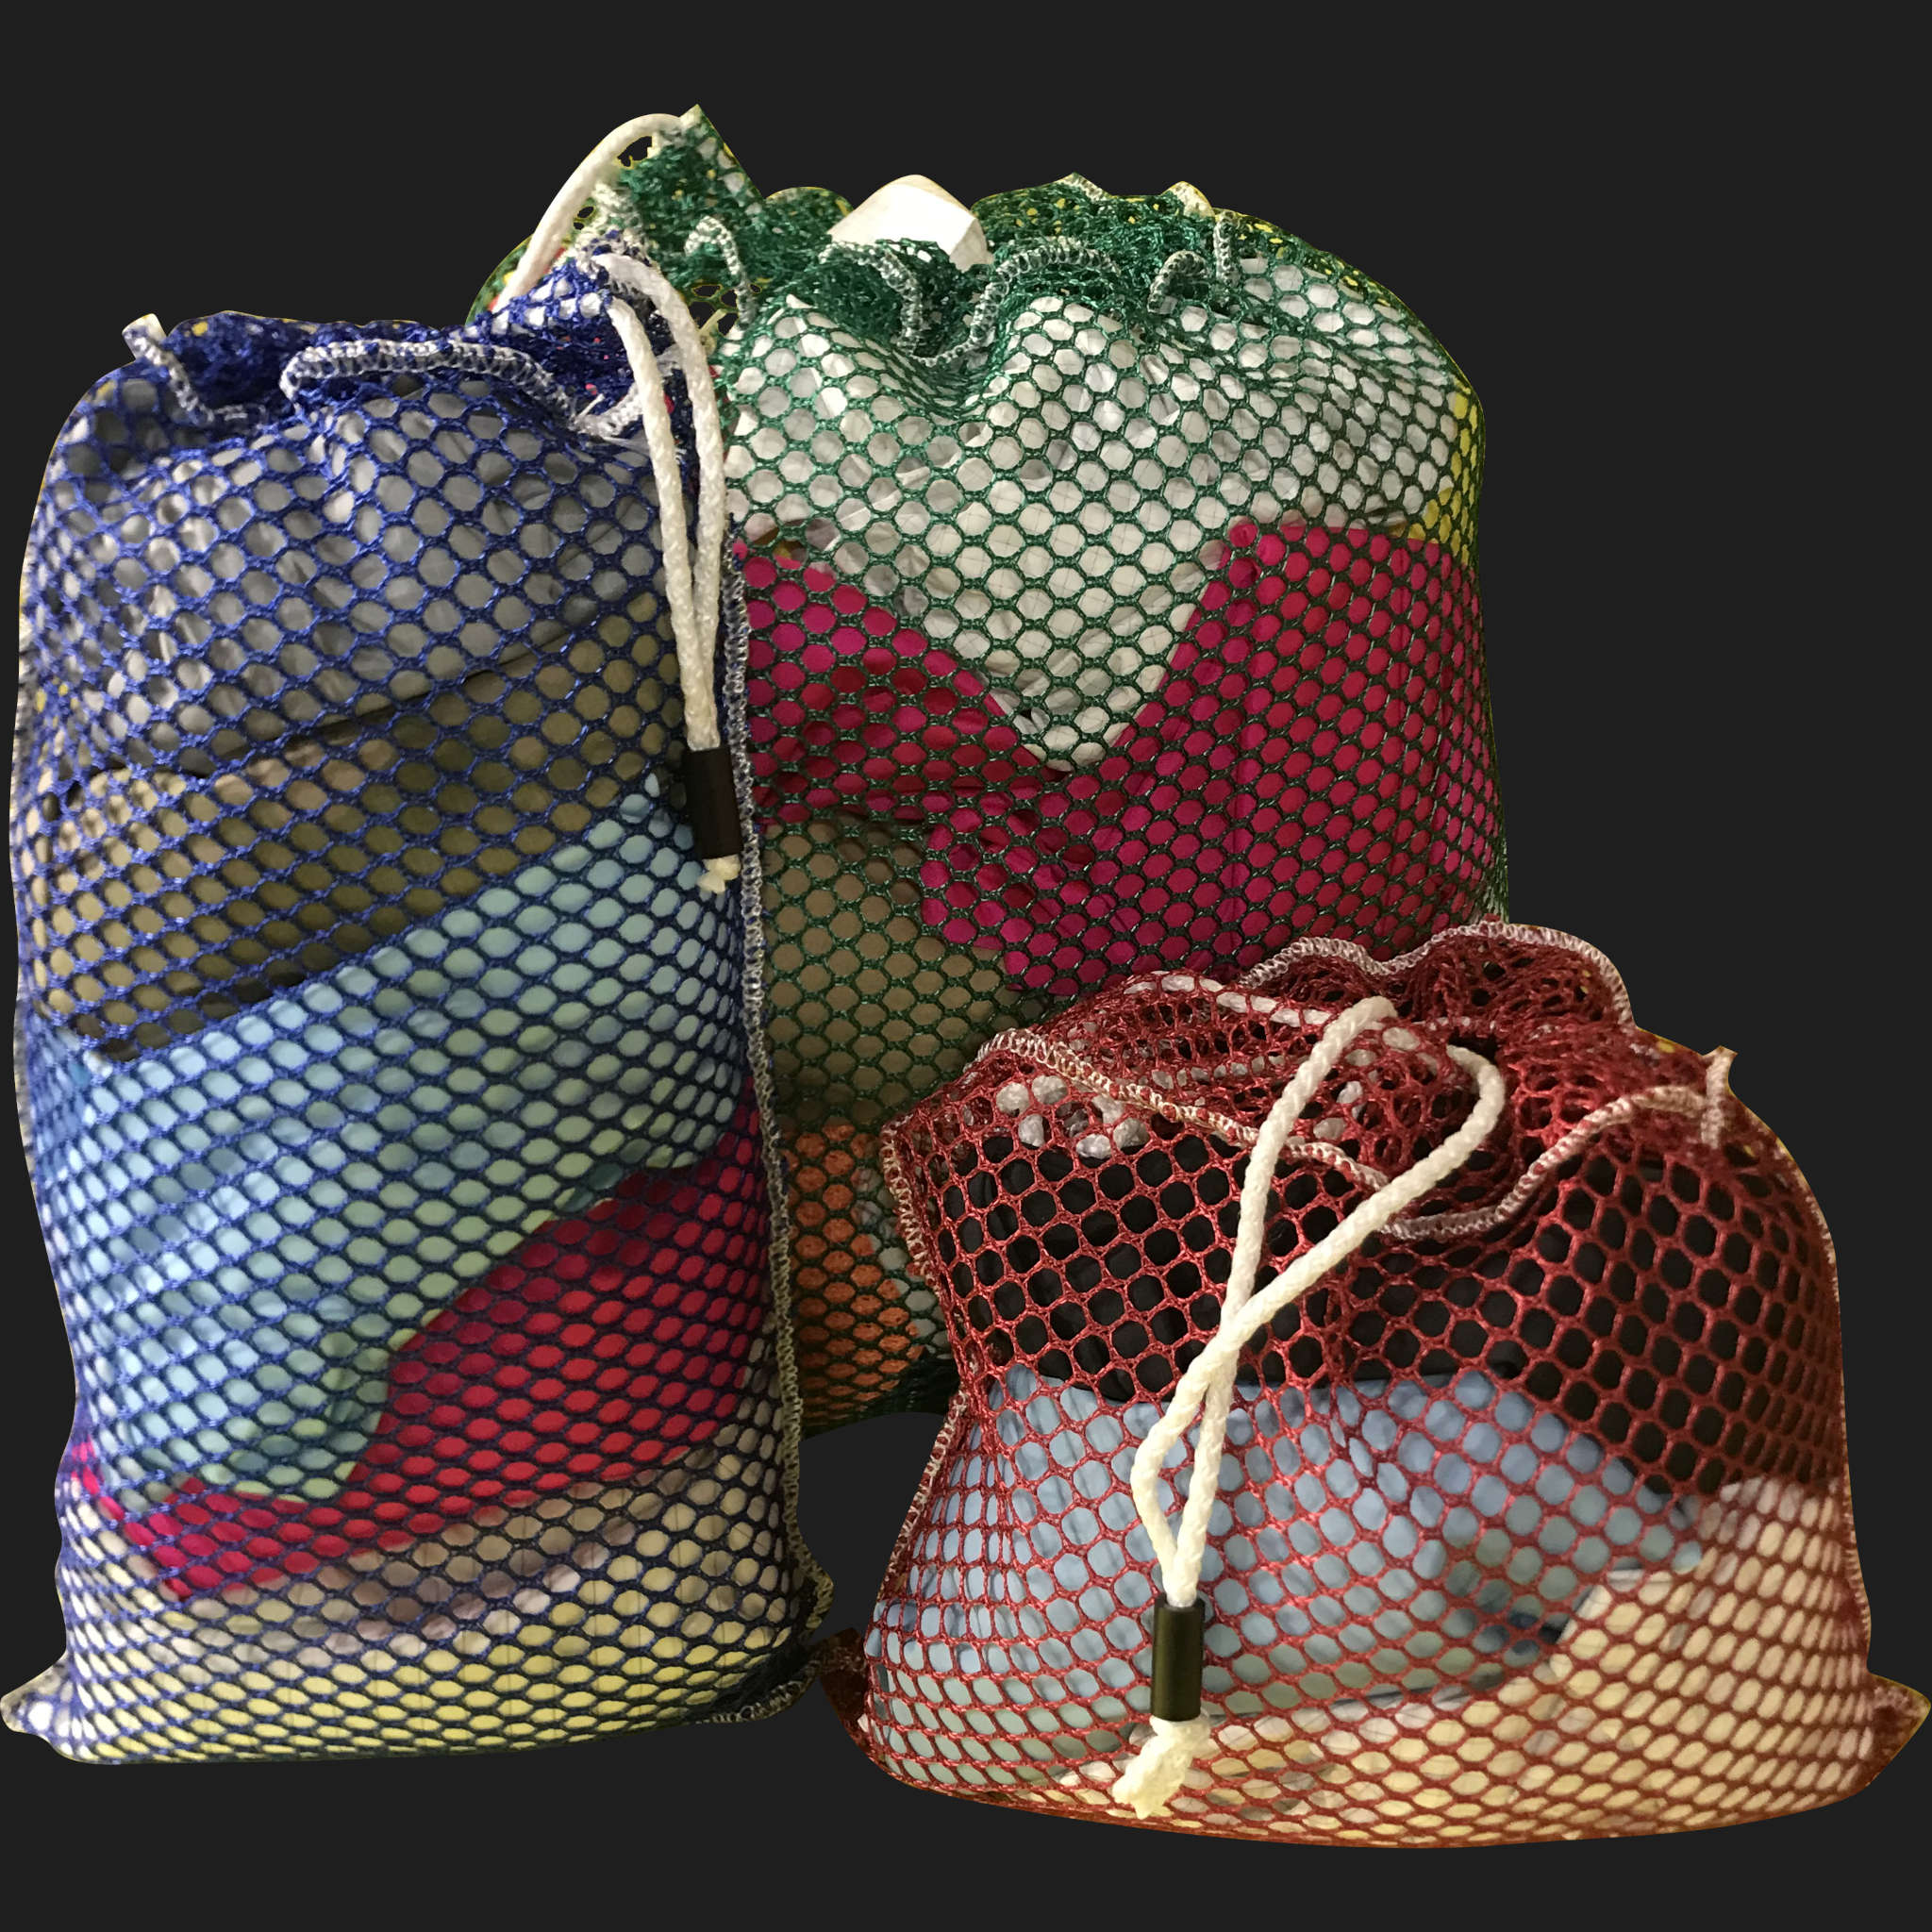 22" x 46" Customized Mesh-Net-Laundry Bags Heavy Duty with Cord and barrellock closure